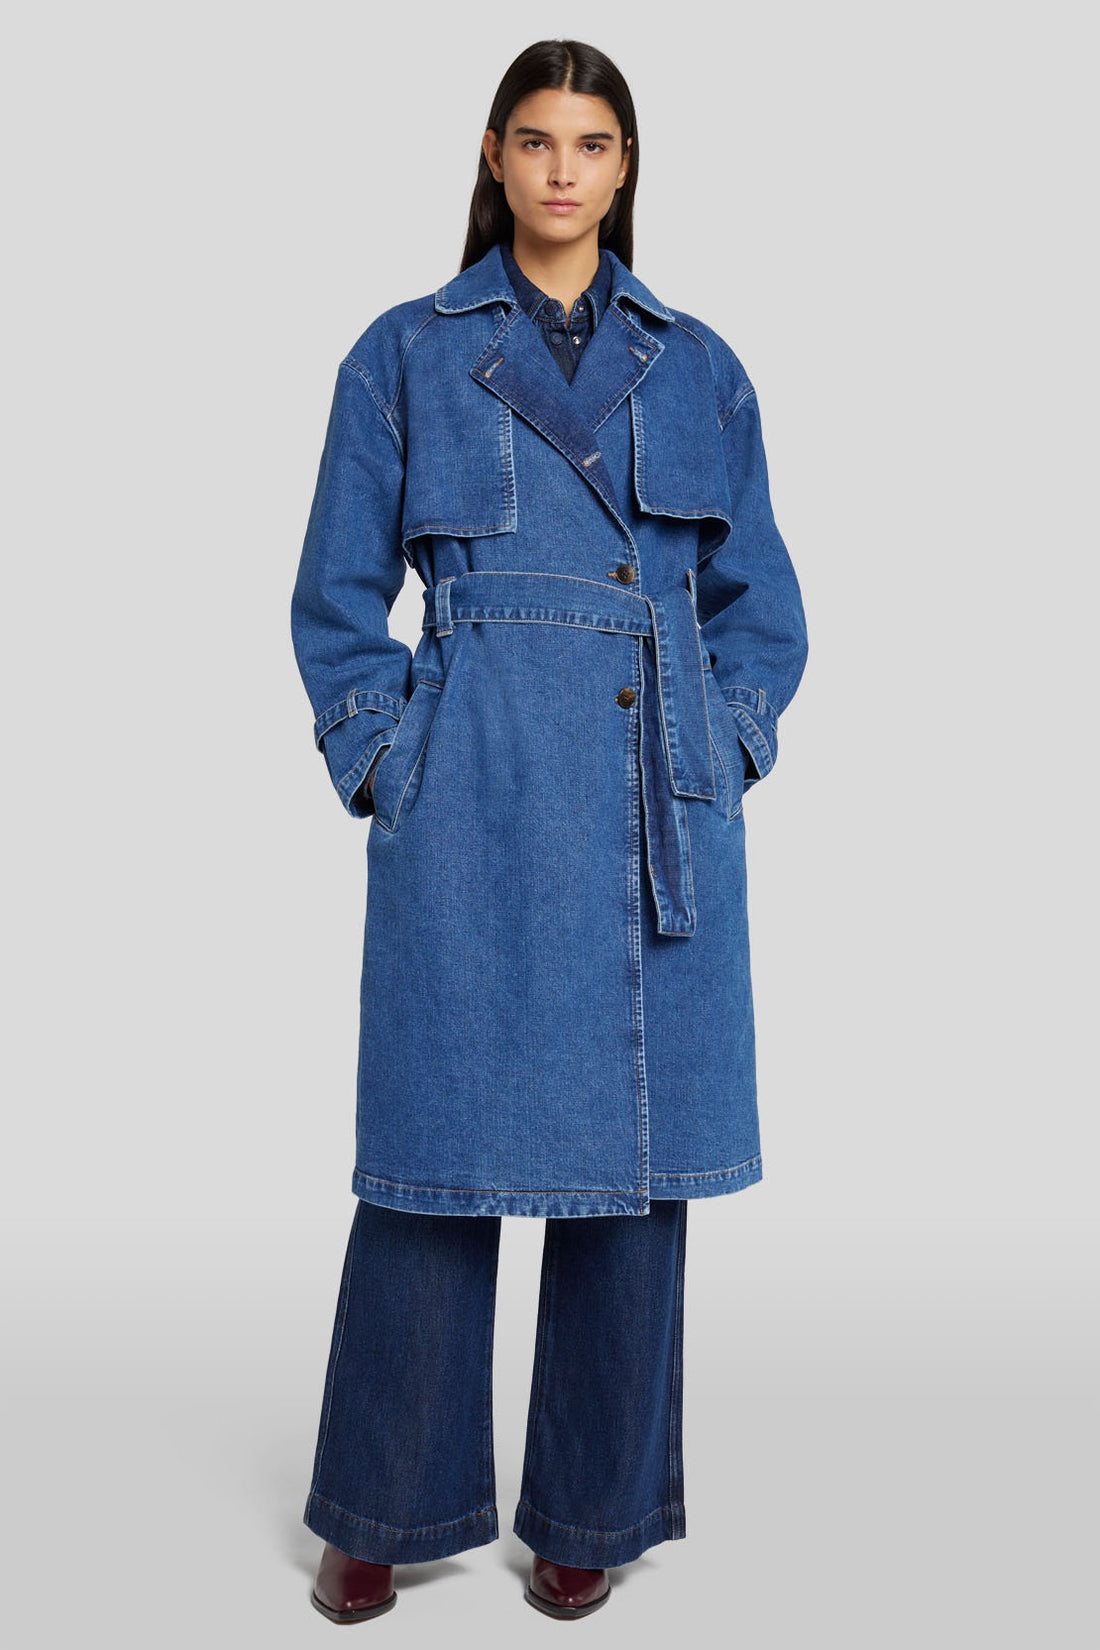 Tailored Denim Trench Calla_JSUSC370CL_CL_01